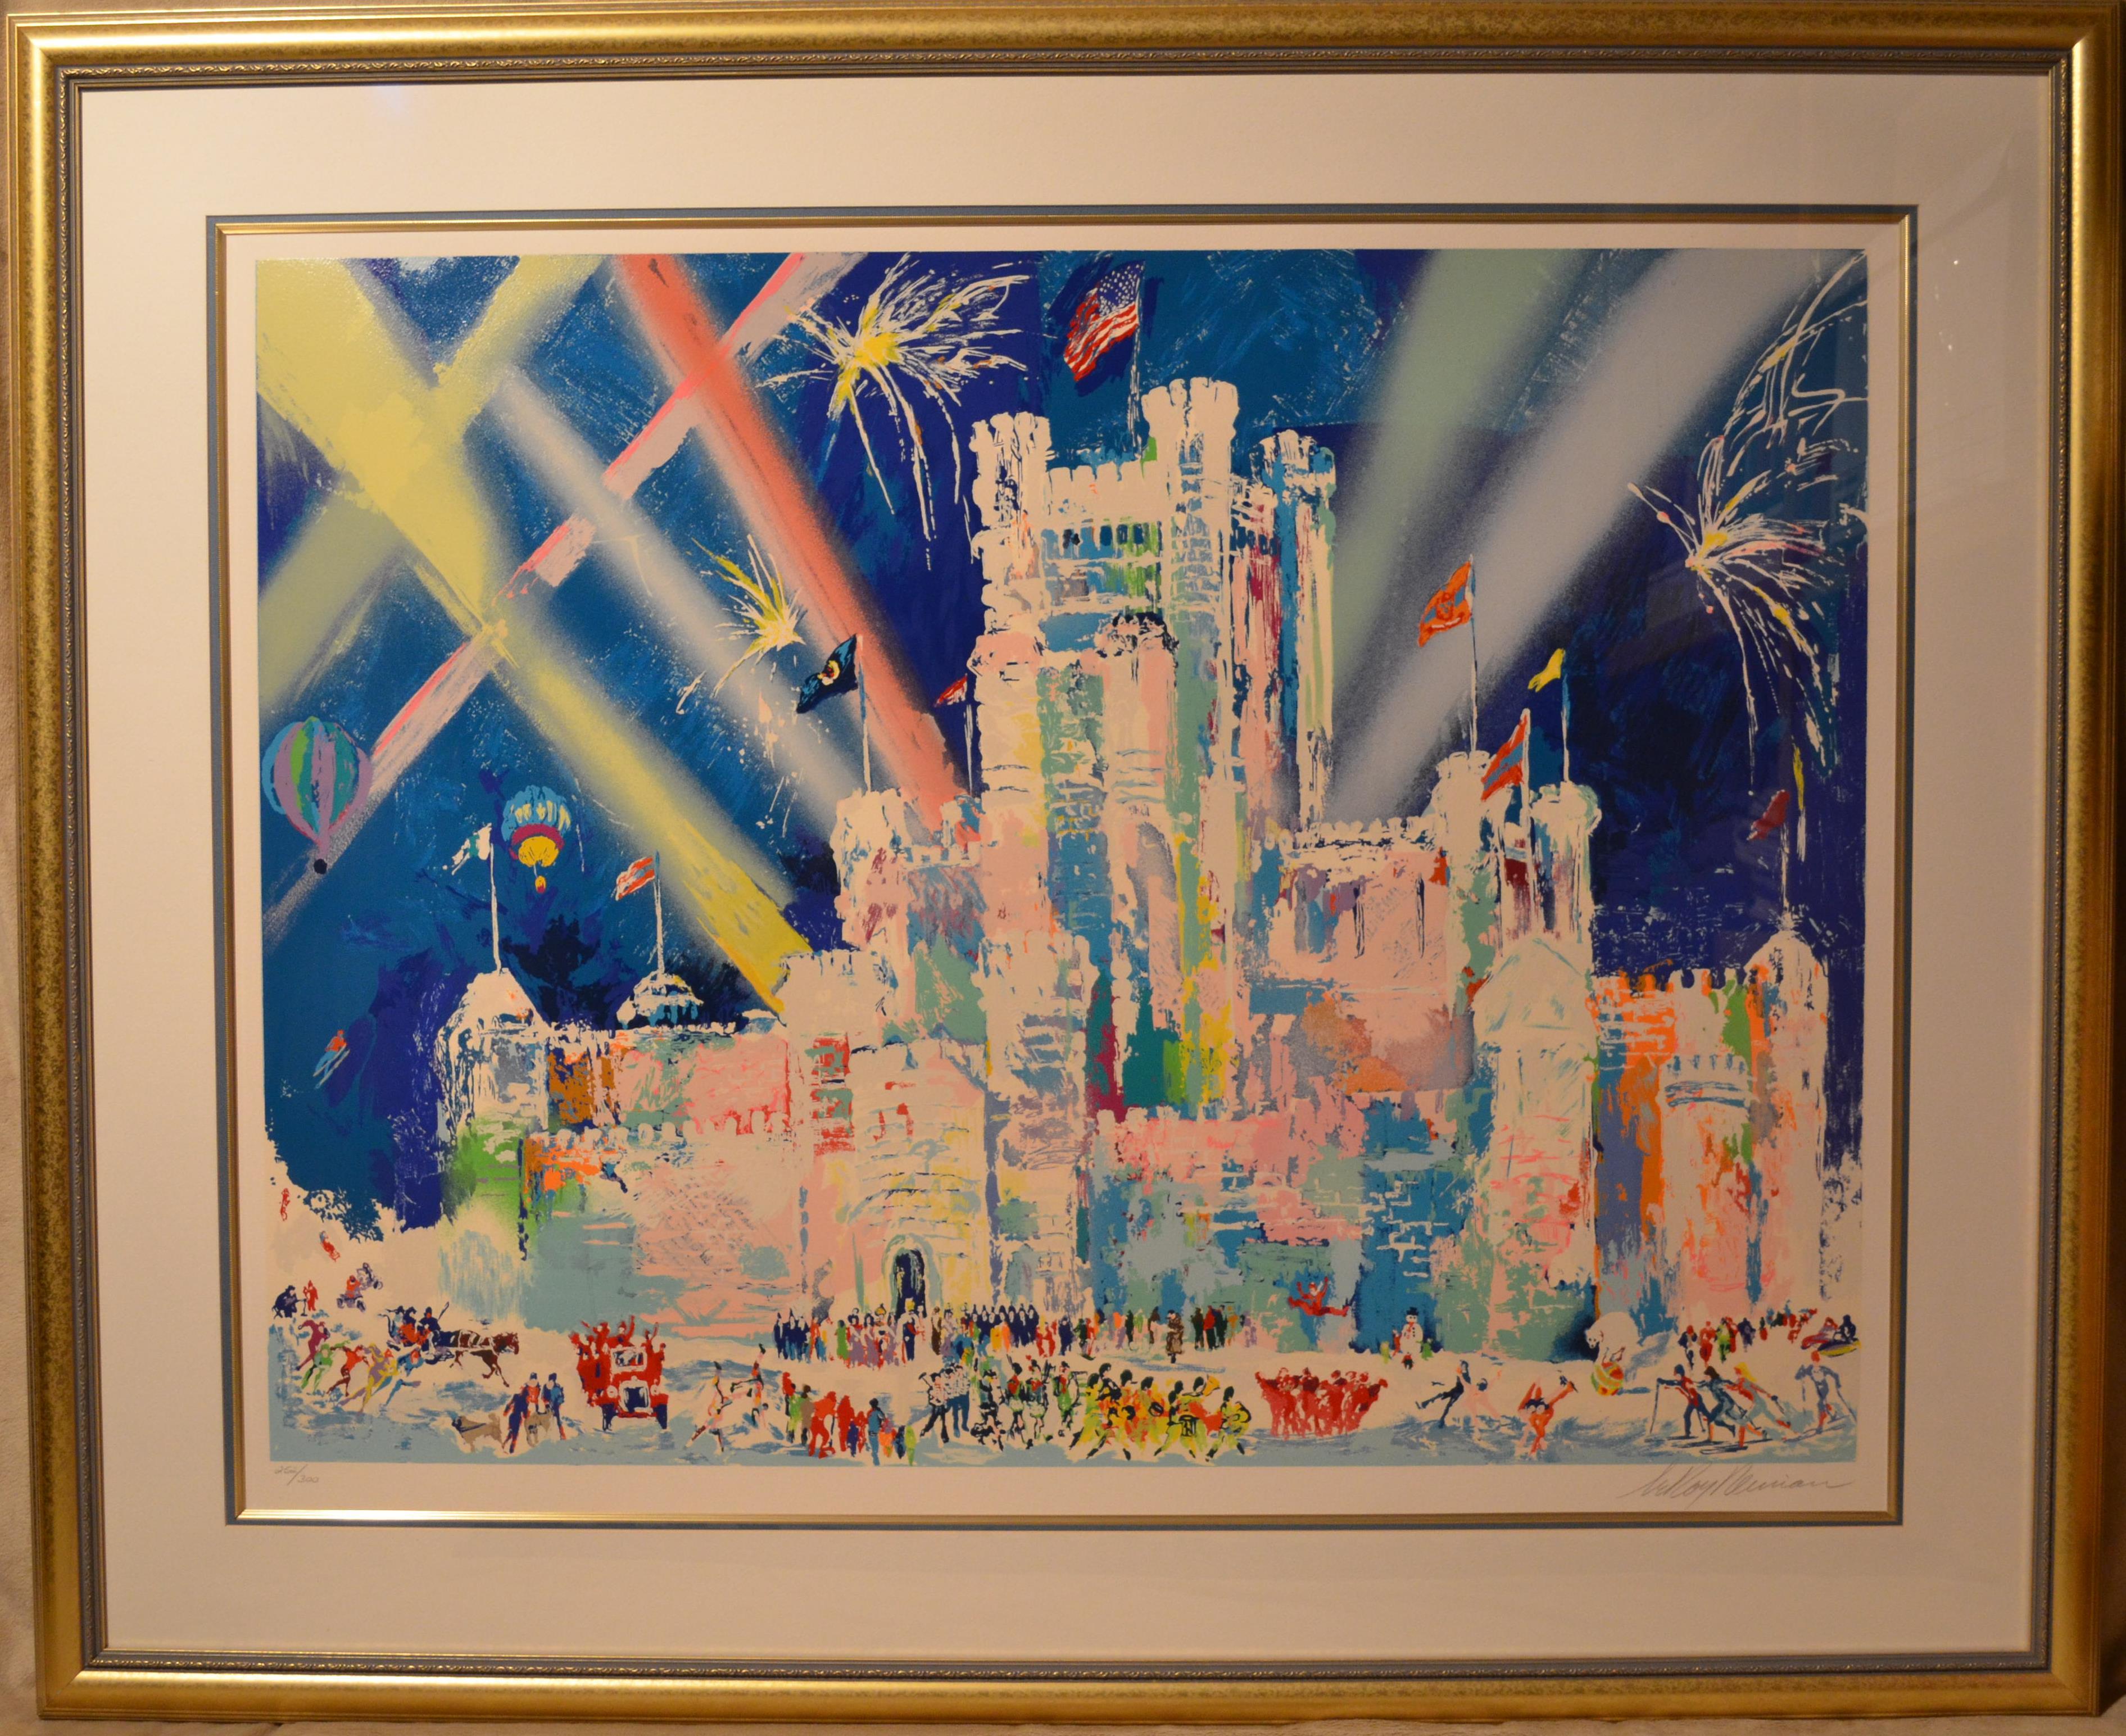 Ice Castle - Limited Edition Serigraph by LeRoy Neiman - Print by Leroy Neiman